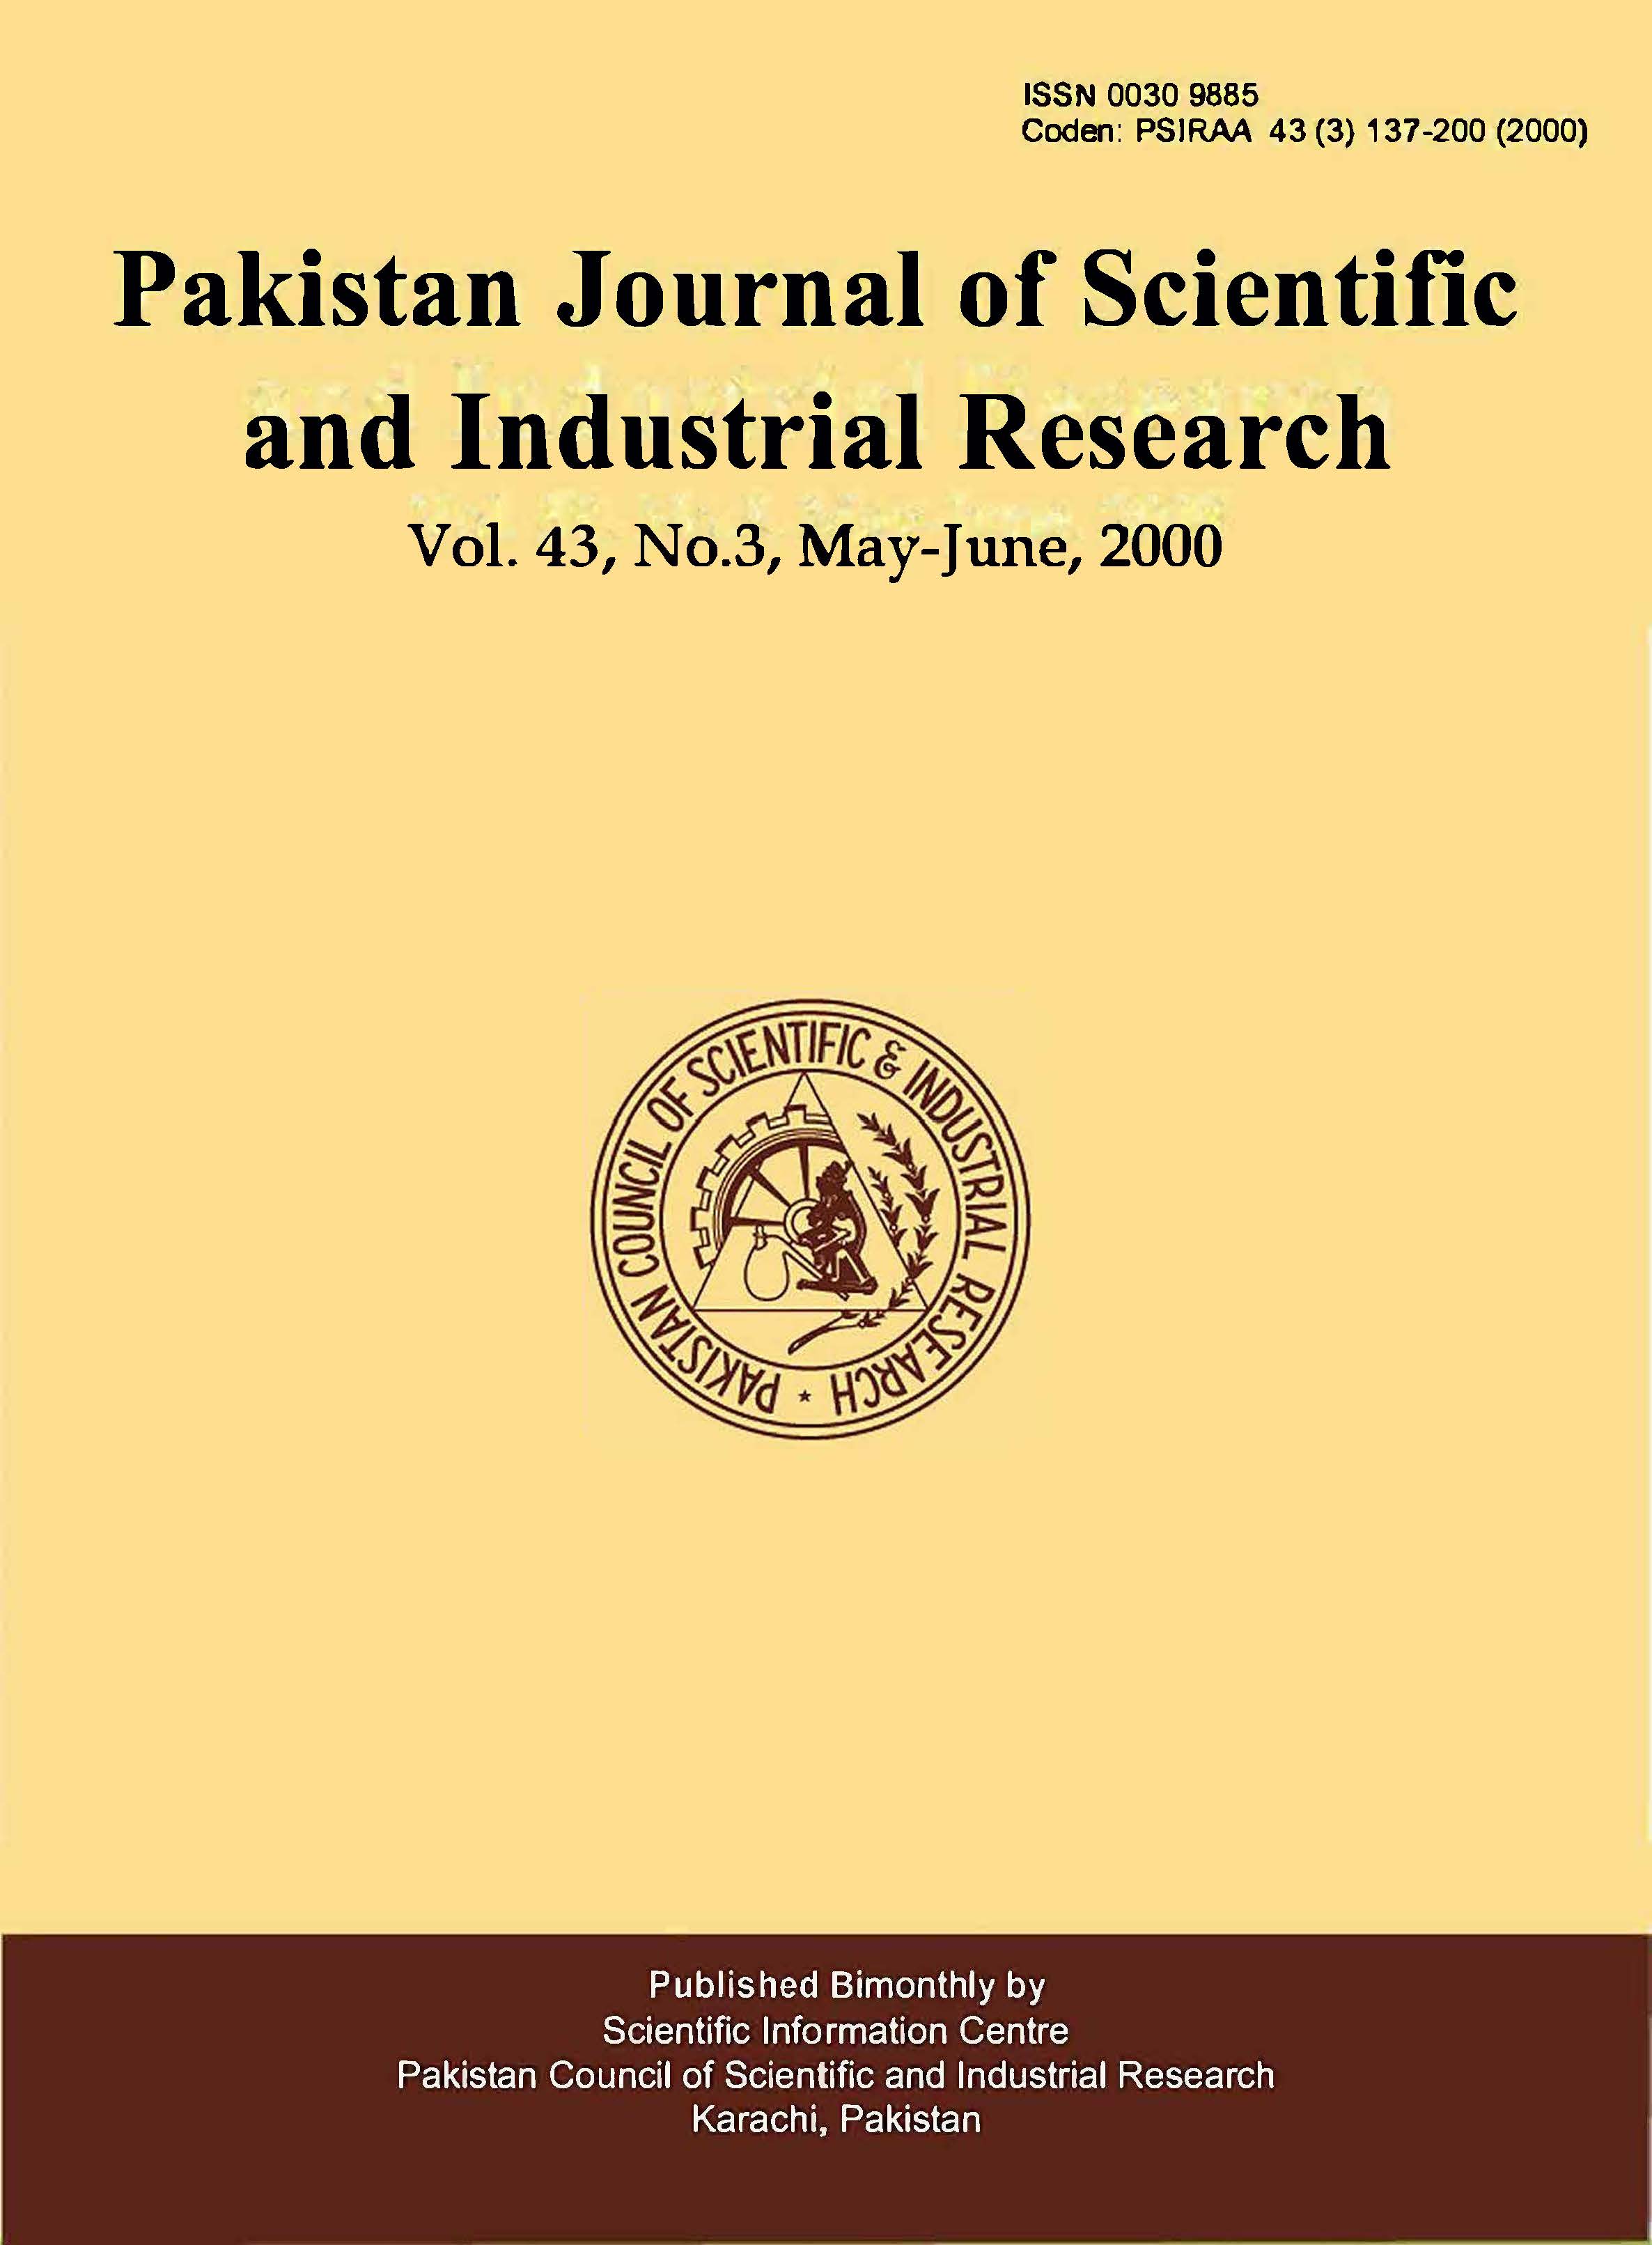 					View Vol. 43 No. 3 (2000): Pakistan Journal of Scientific and Industrial Research
				